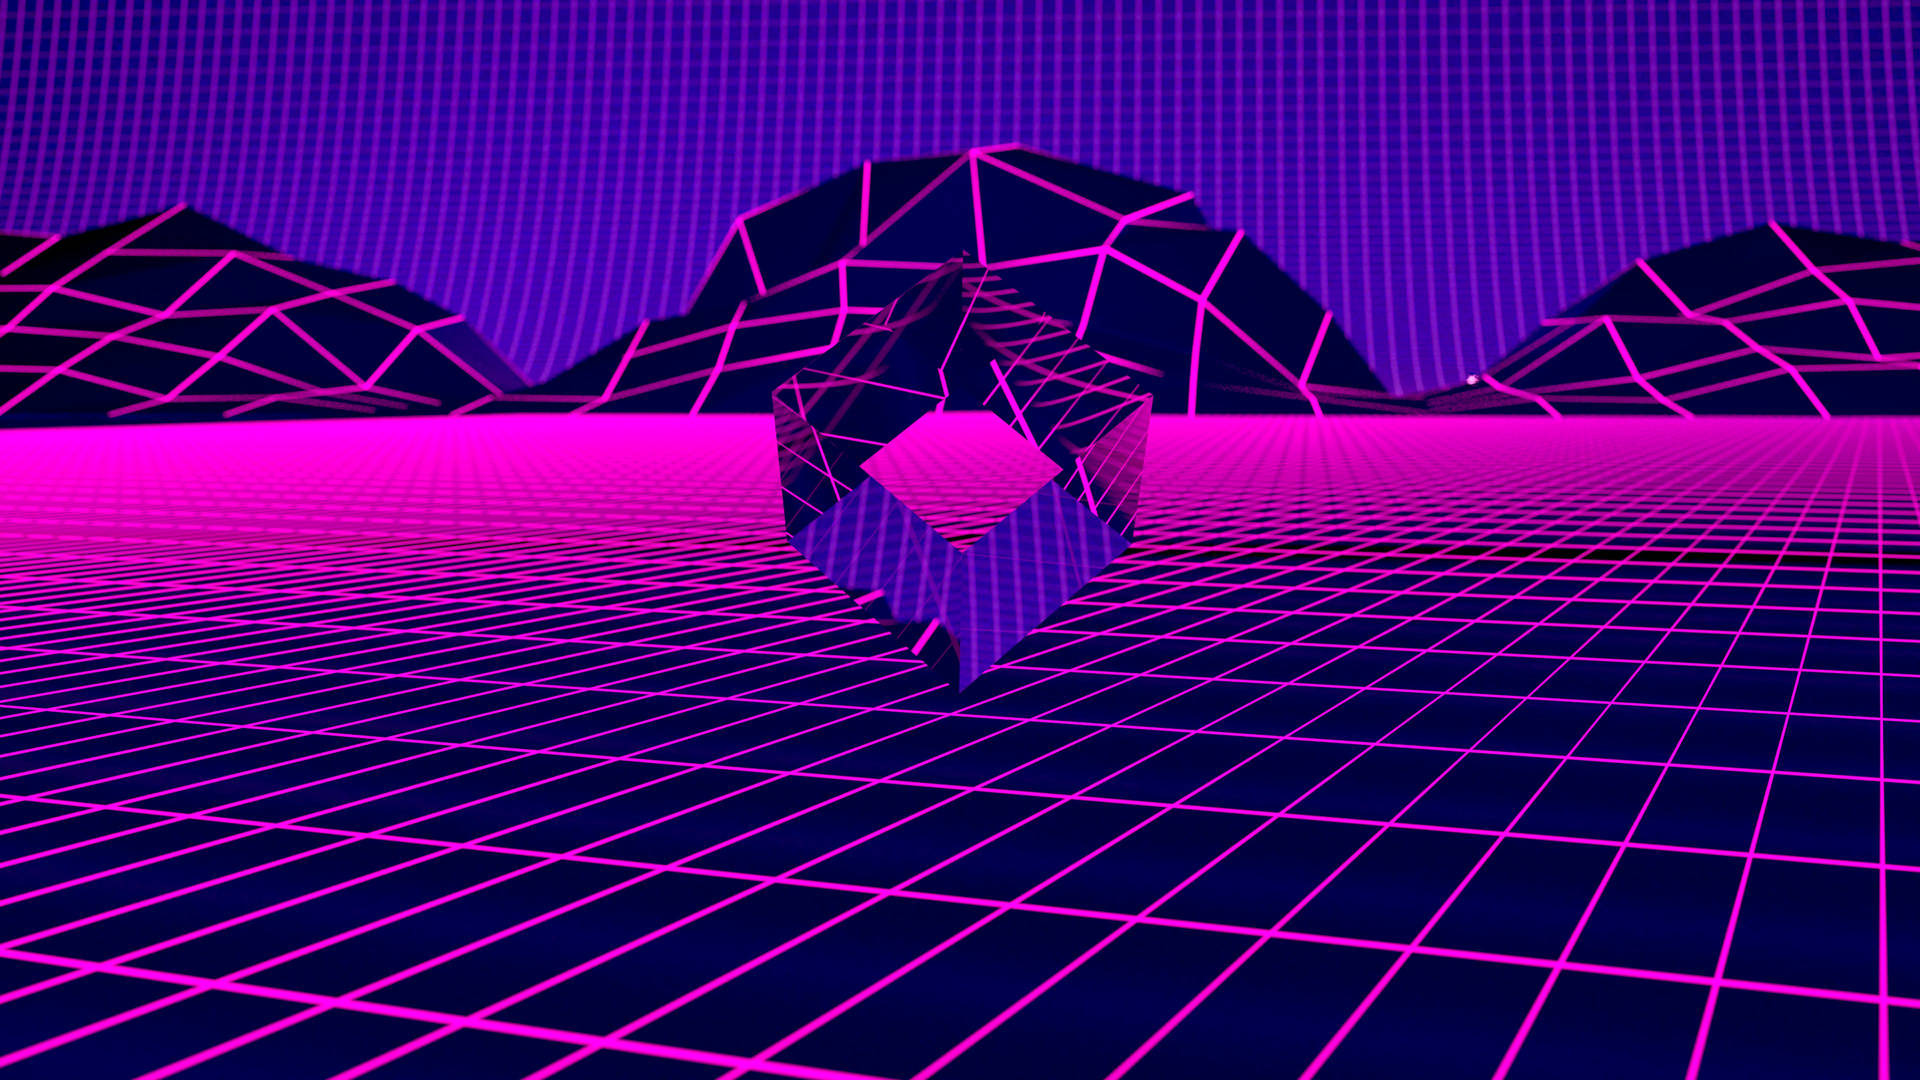 Relive the past with this avant-garde 3D RetroWave Cube! Wallpaper